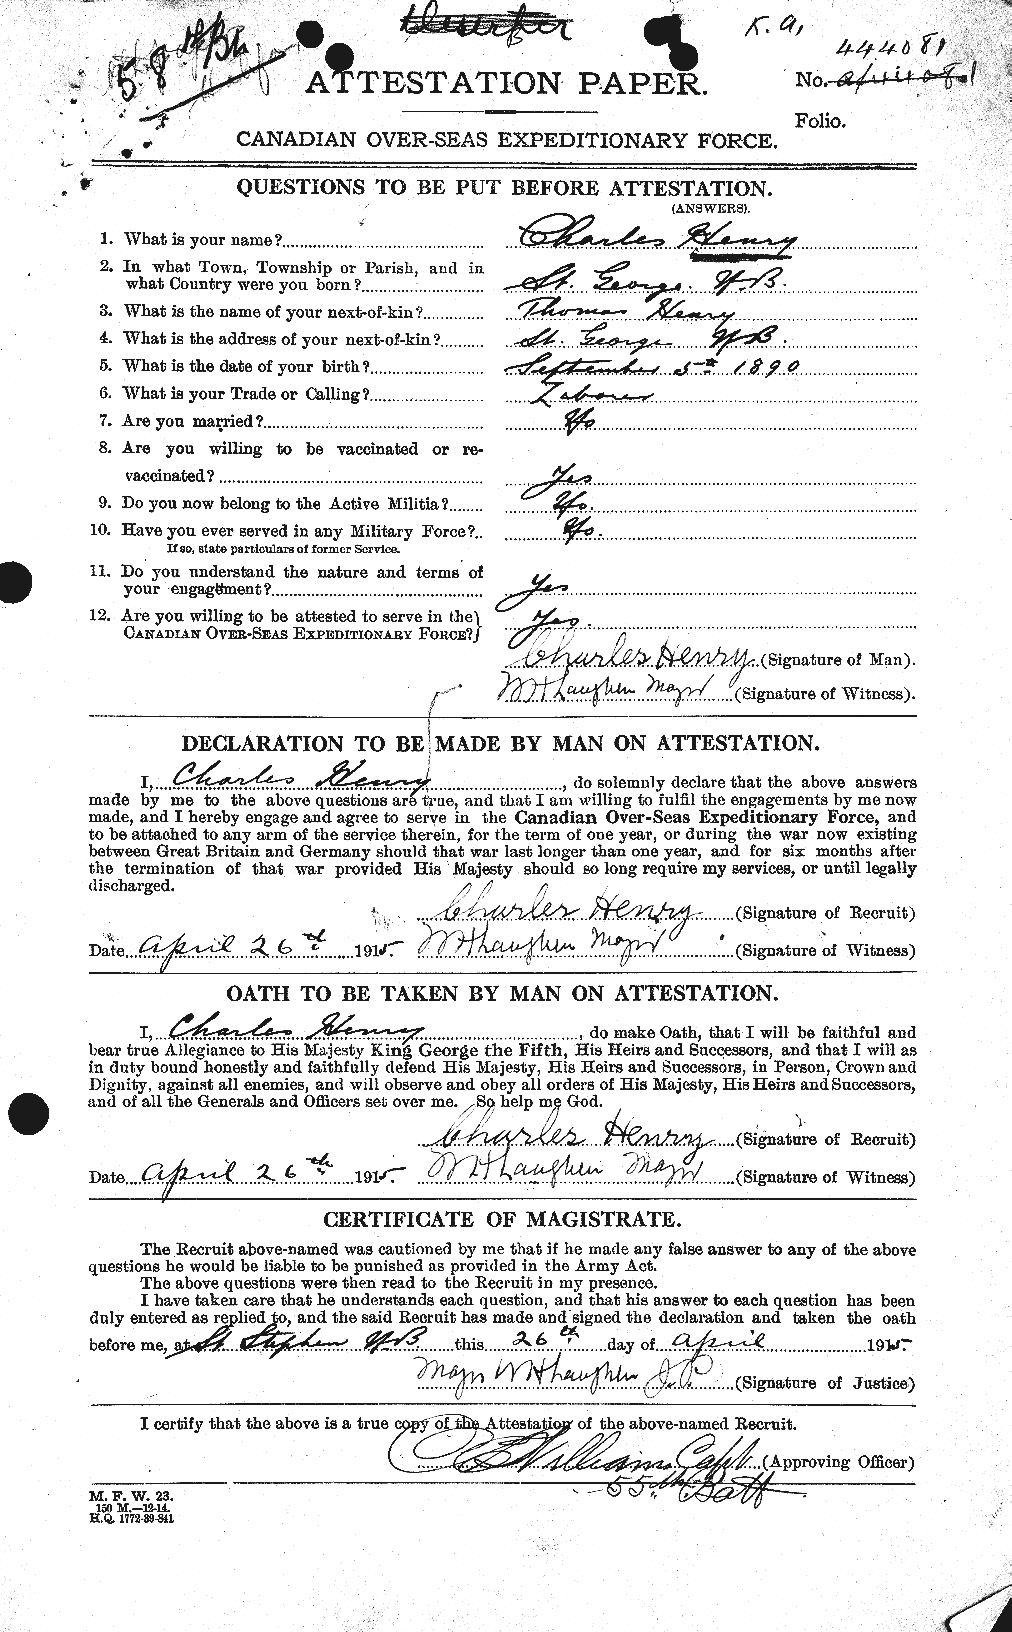 Personnel Records of the First World War - CEF 392800a